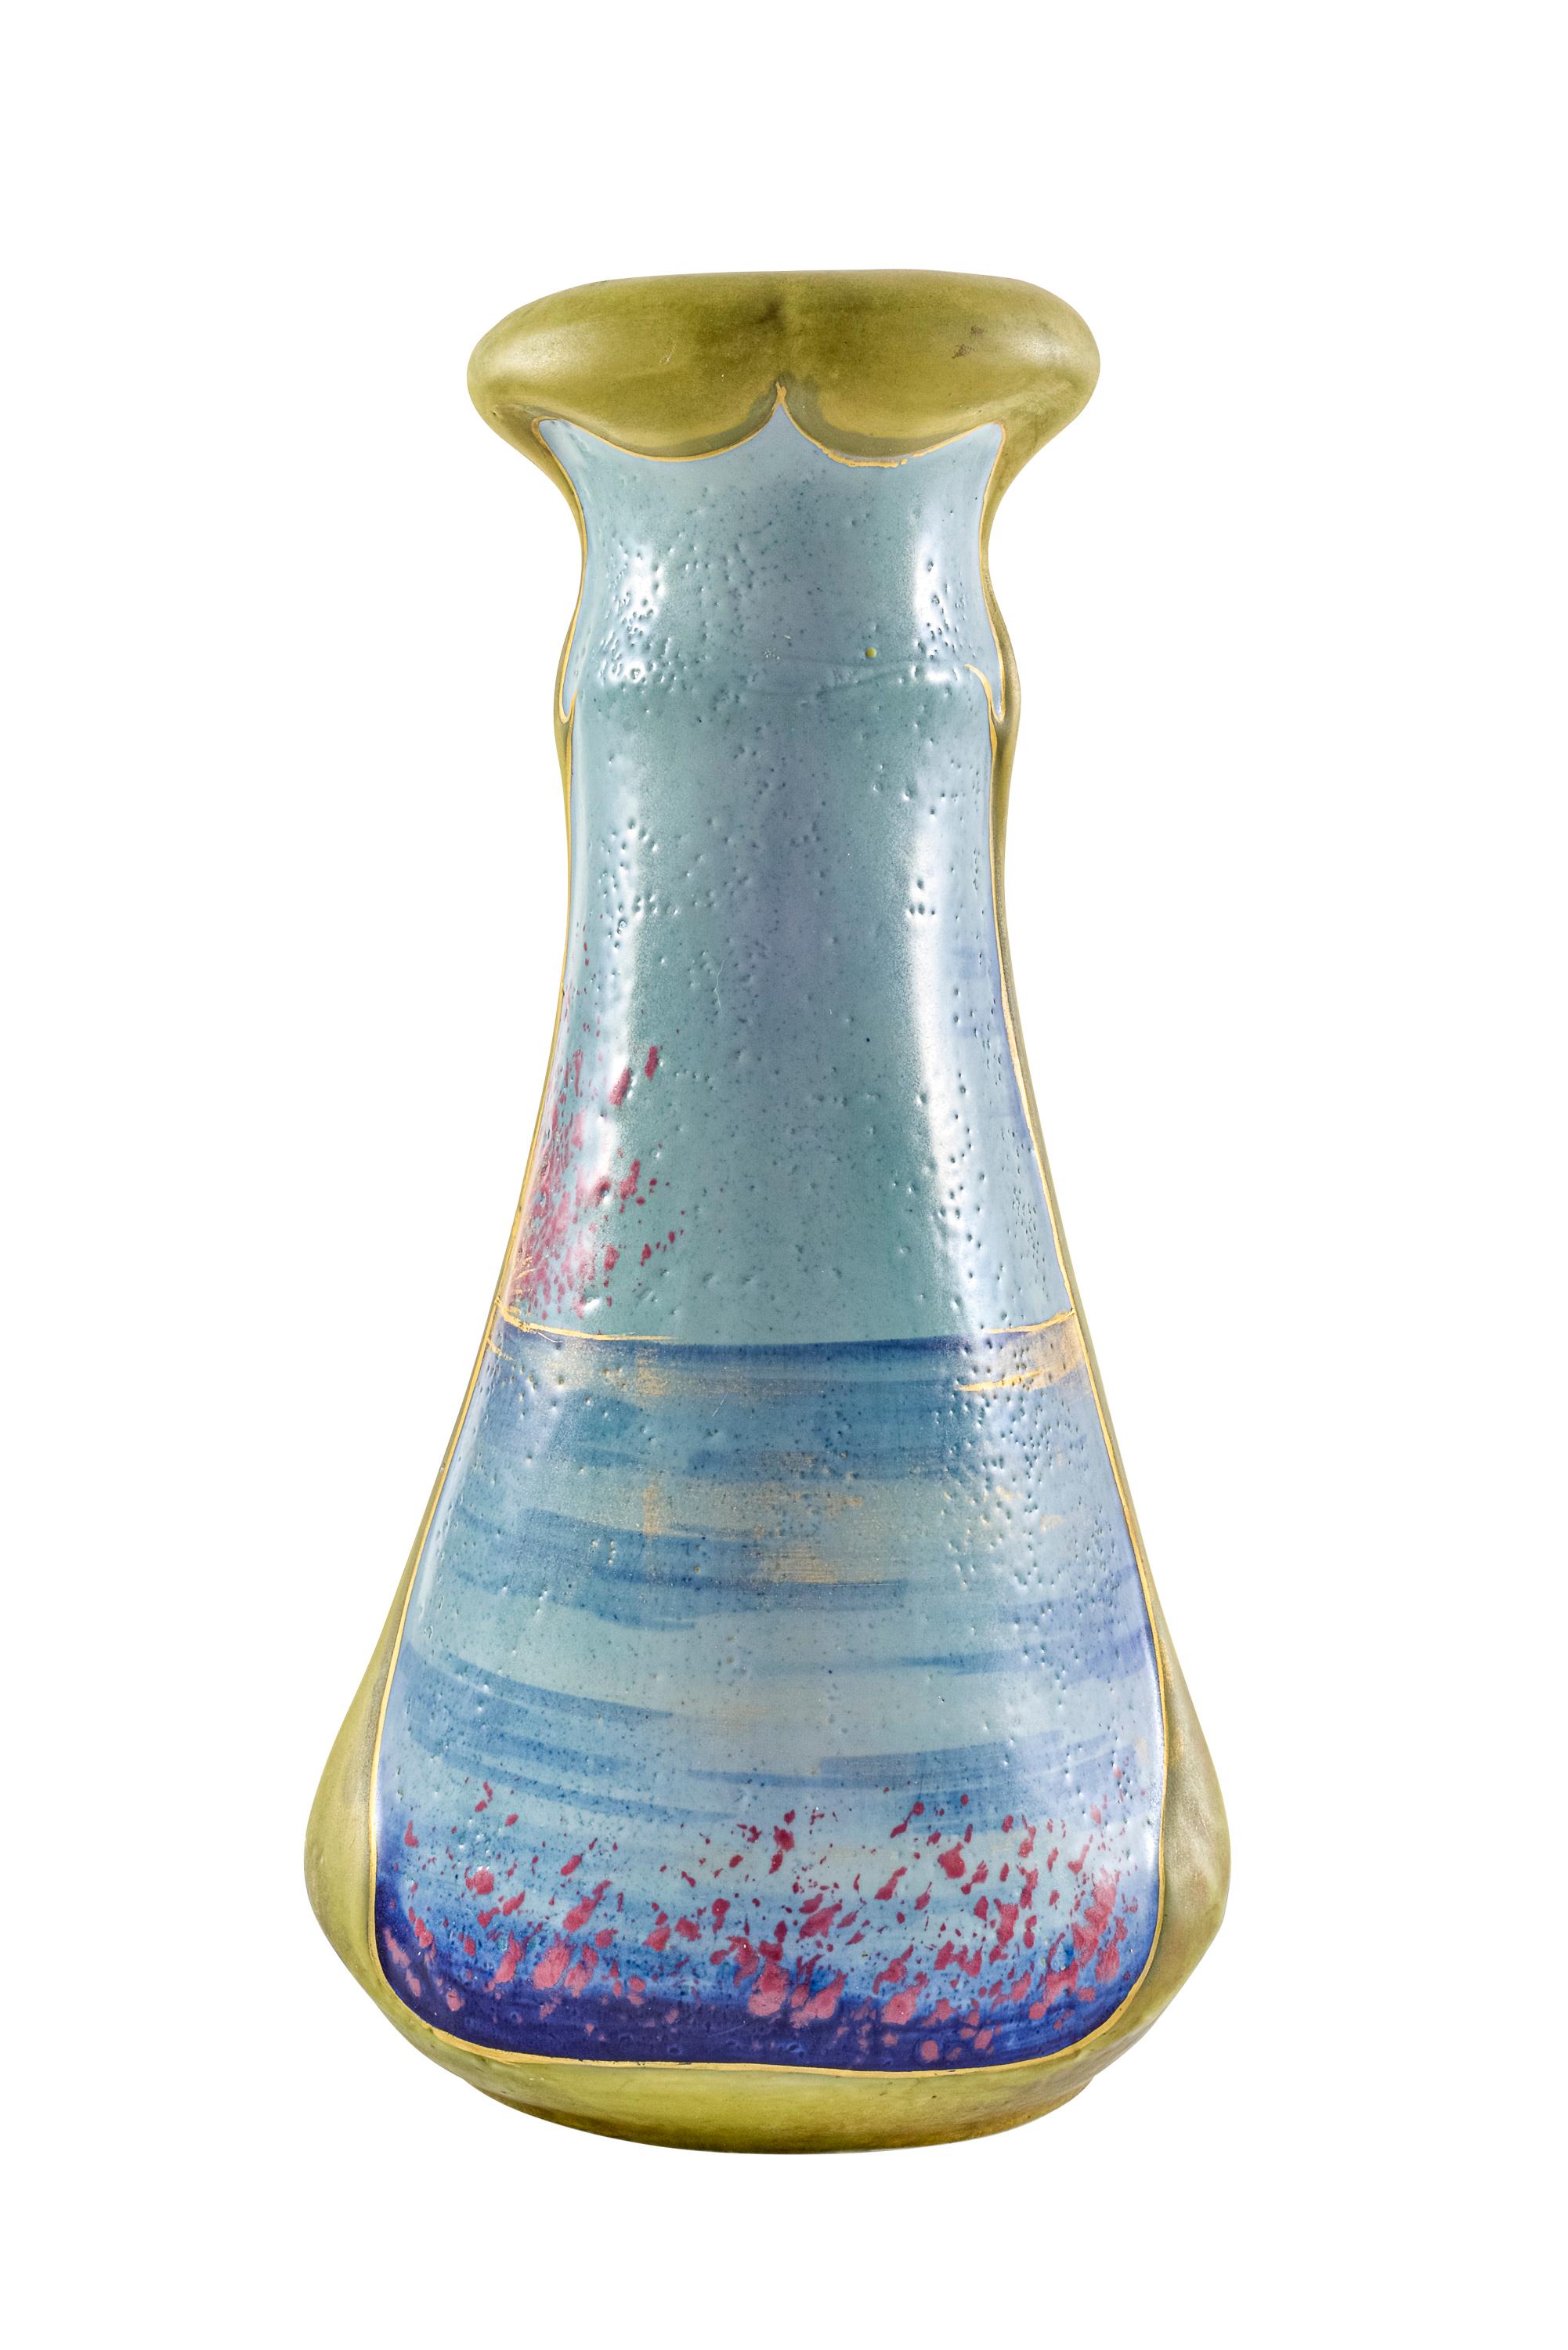 Portrait Vase Allegory of France Art Nouveau Bohemia Amphora Werke, circa 1901 In Good Condition For Sale In Vienna, AT